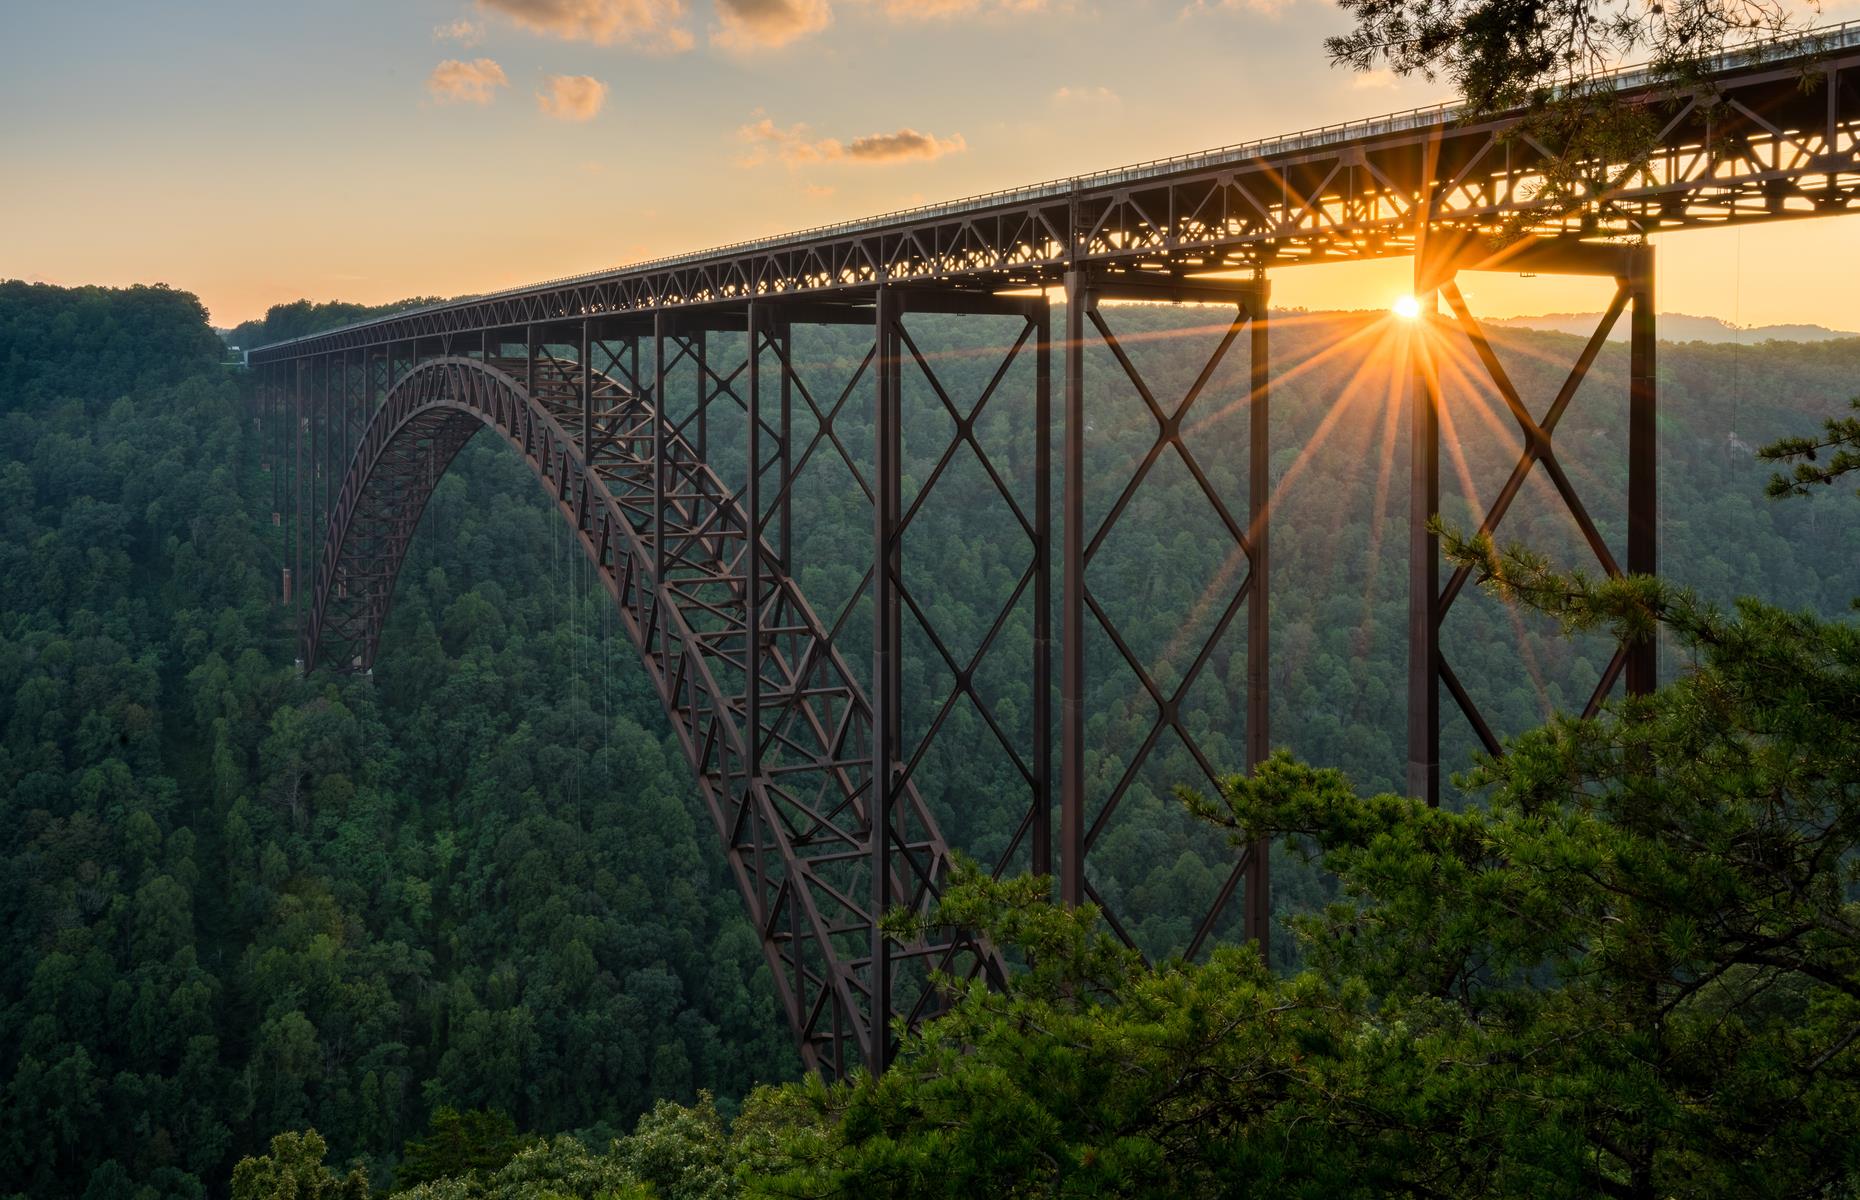 Slide 96 of 100: This enormous steel-arch bridge has spanned West Virginia’s New River Gorge since the 1970s. It's among the longest bridges of its kind in the world, and its height is dizzying: it soars about 876 feet (267m) above the waters below. The mammoth feat of engineering sits in stark contrast to the lush scenery all around. Now take a look at more impressive bridges in the USA.